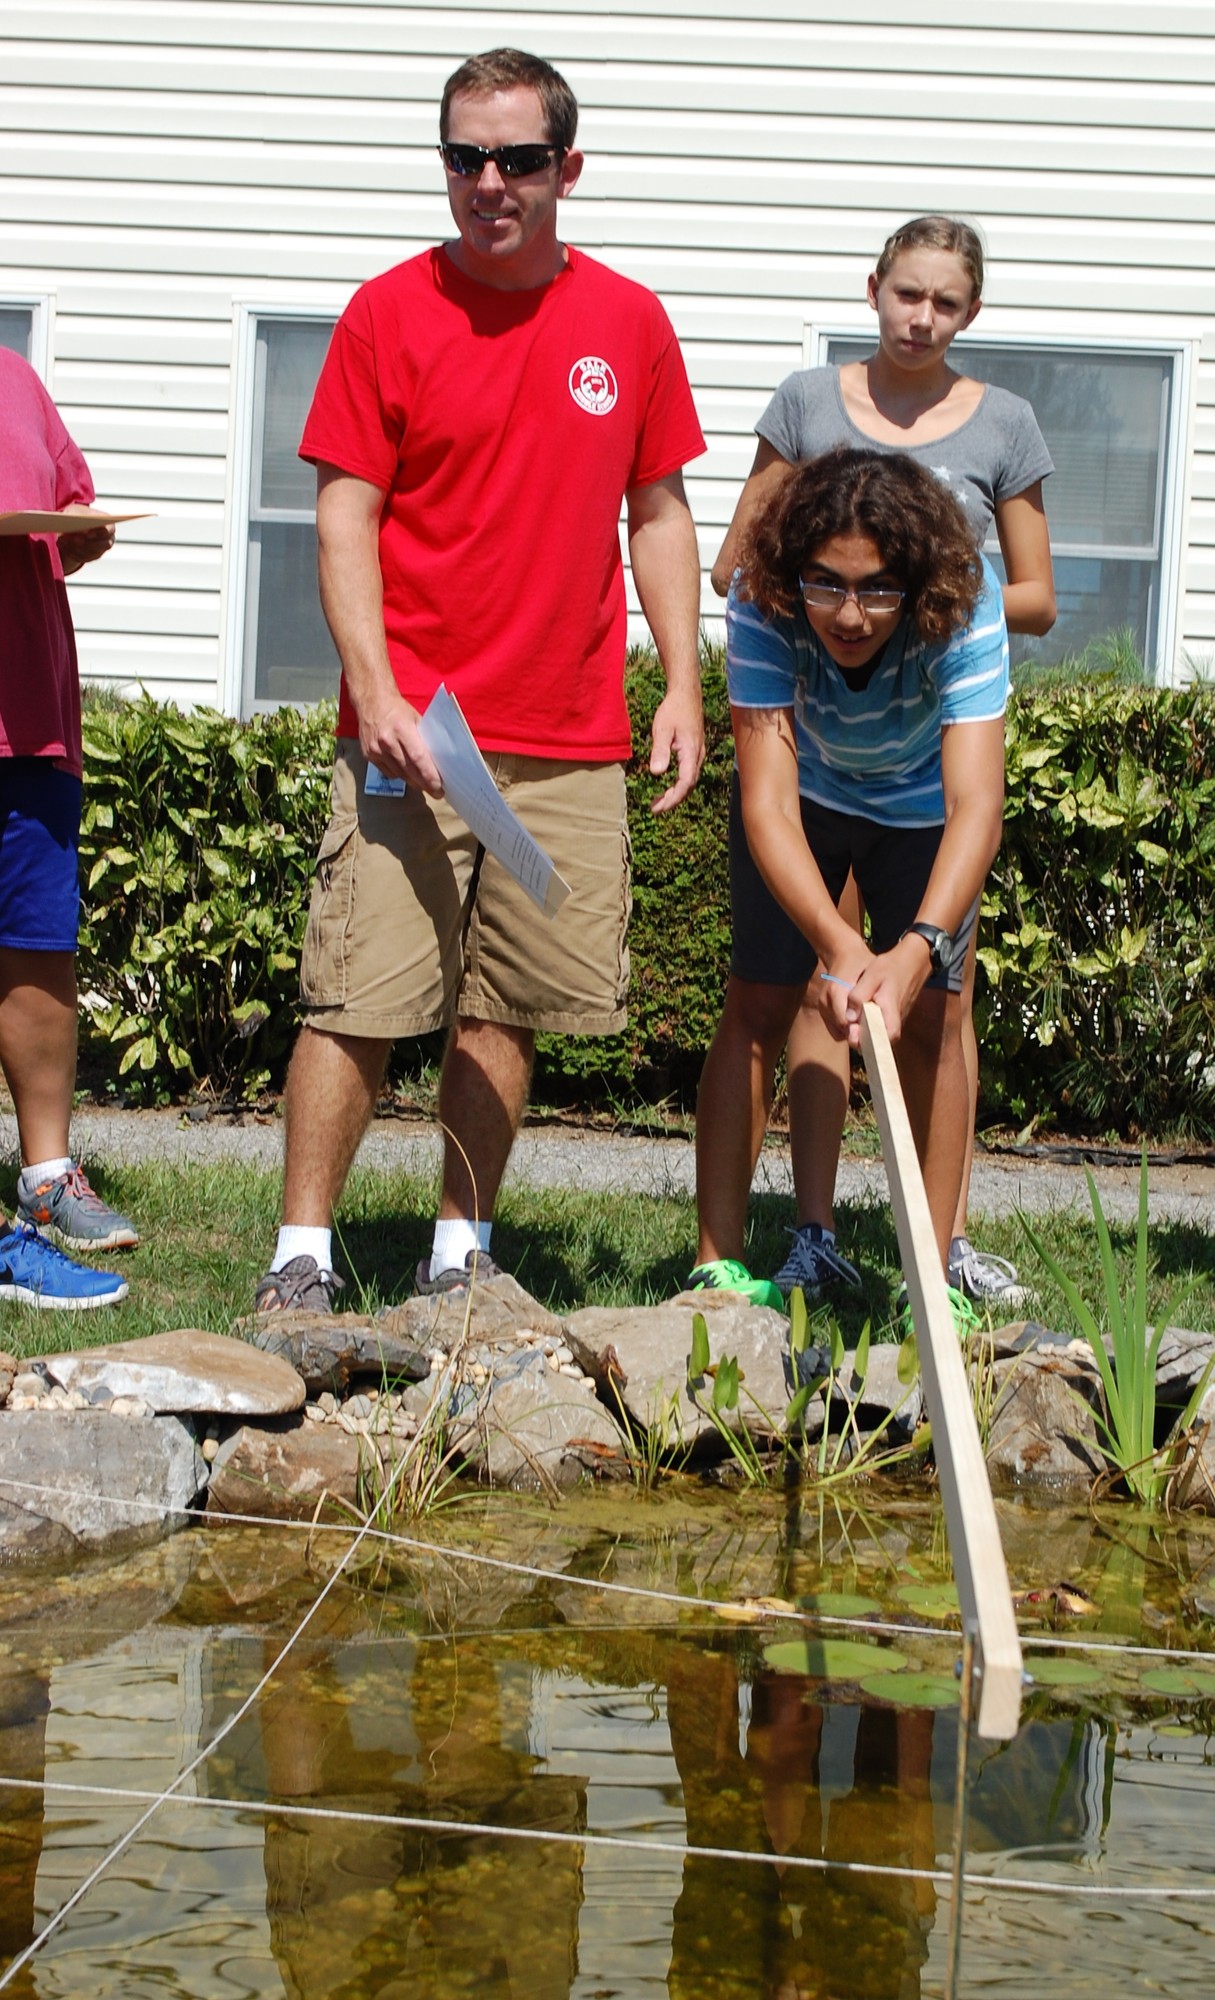 Eighth-grader Macedonio Cicala measured the depth of the pond with the assistance of science teacher Paul Zaratin.